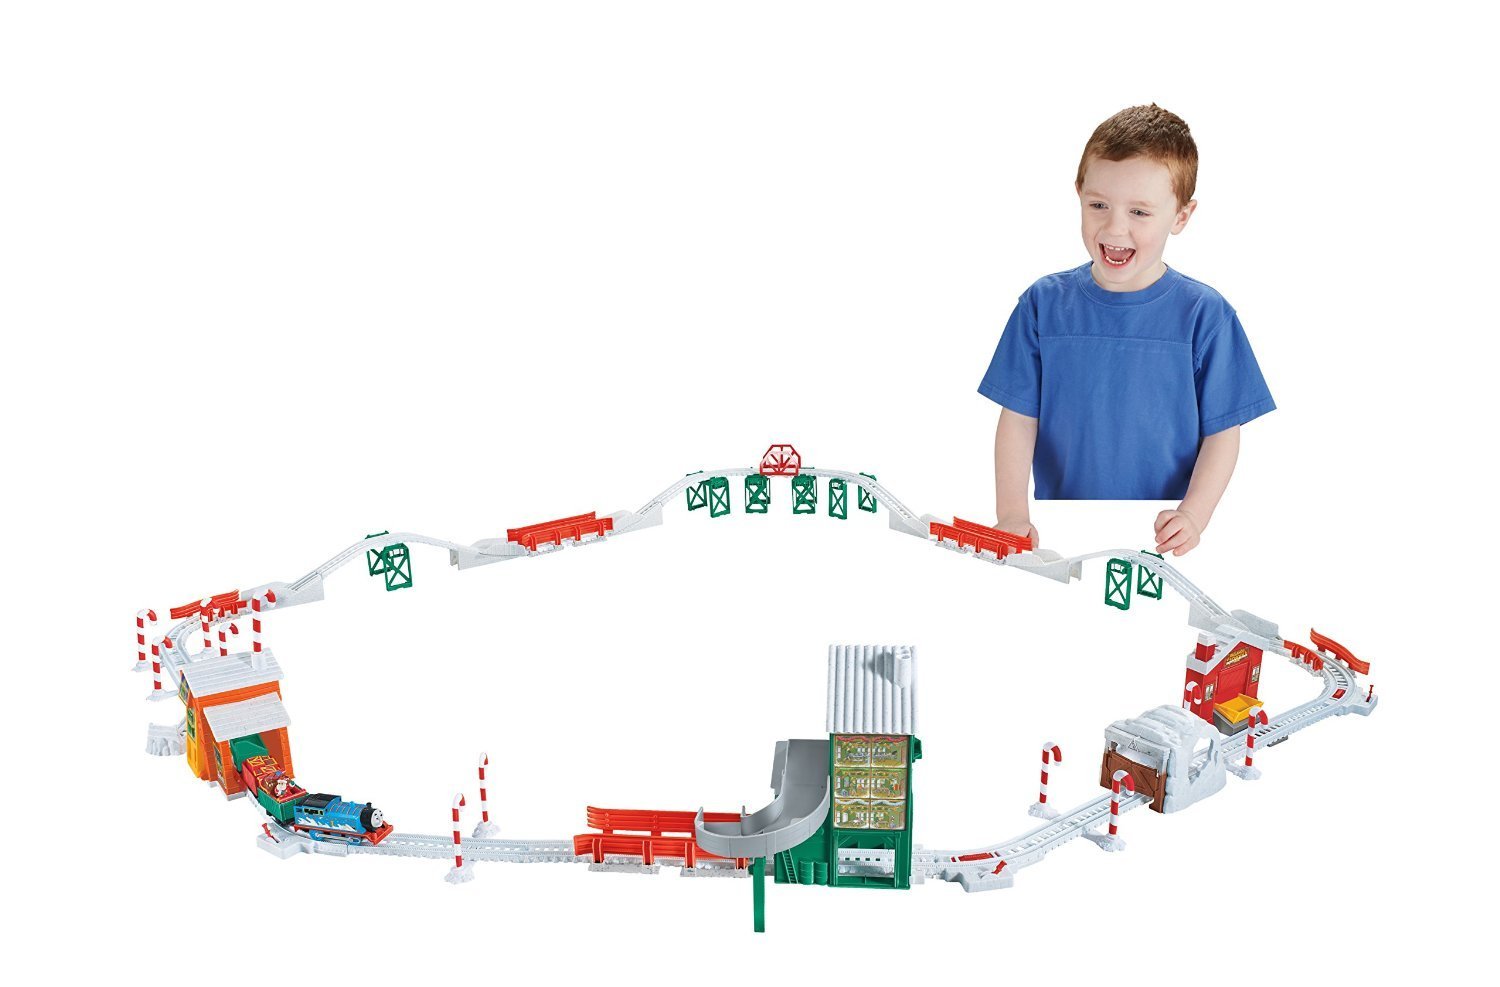 Thomas the Train TrackMaster Holiday Cargo Delivery Set Only $39.99 – 50% Savings!!